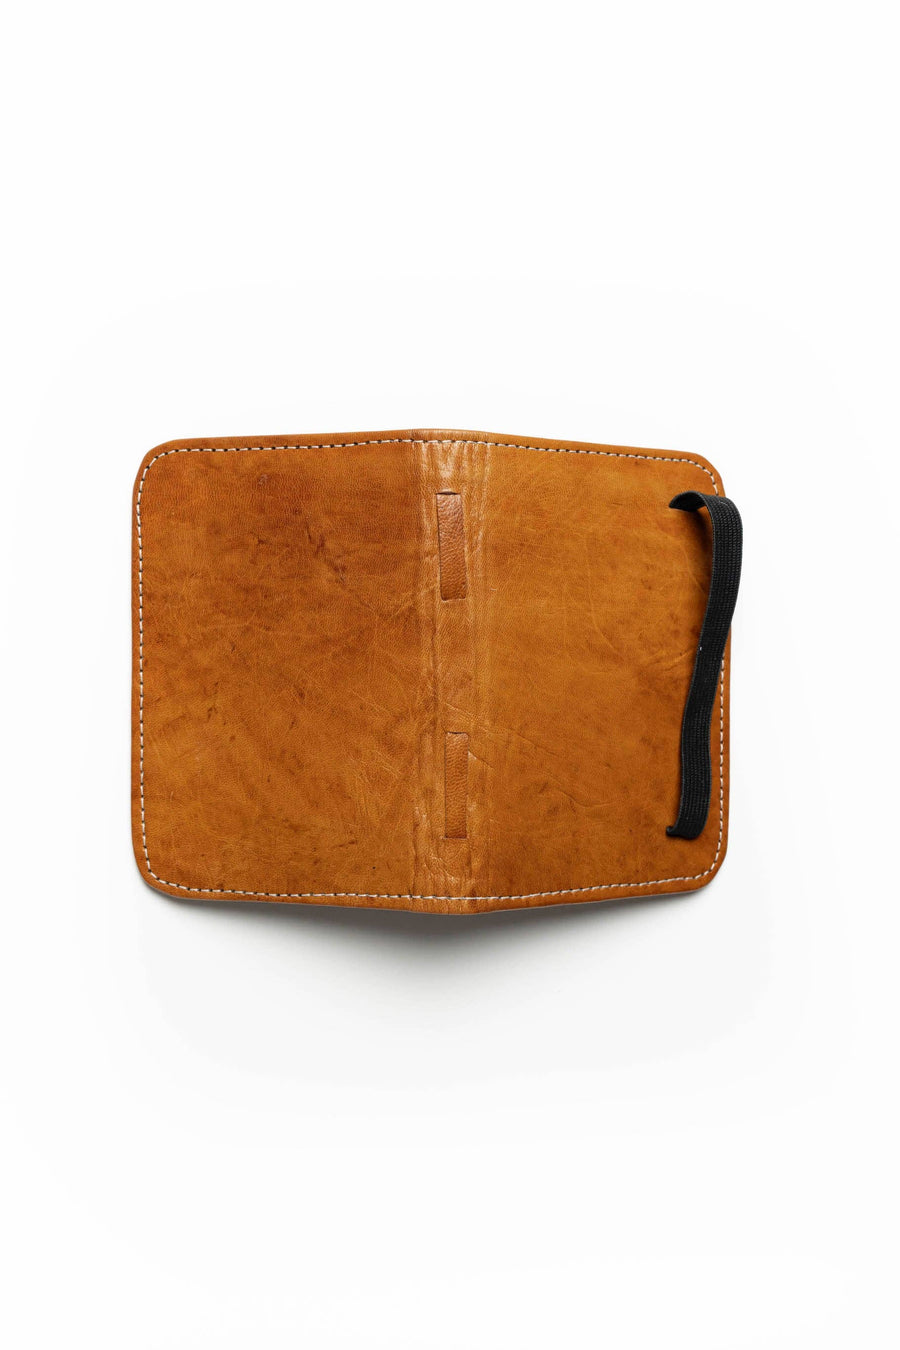 Passport Cover: Brown Goat Leather